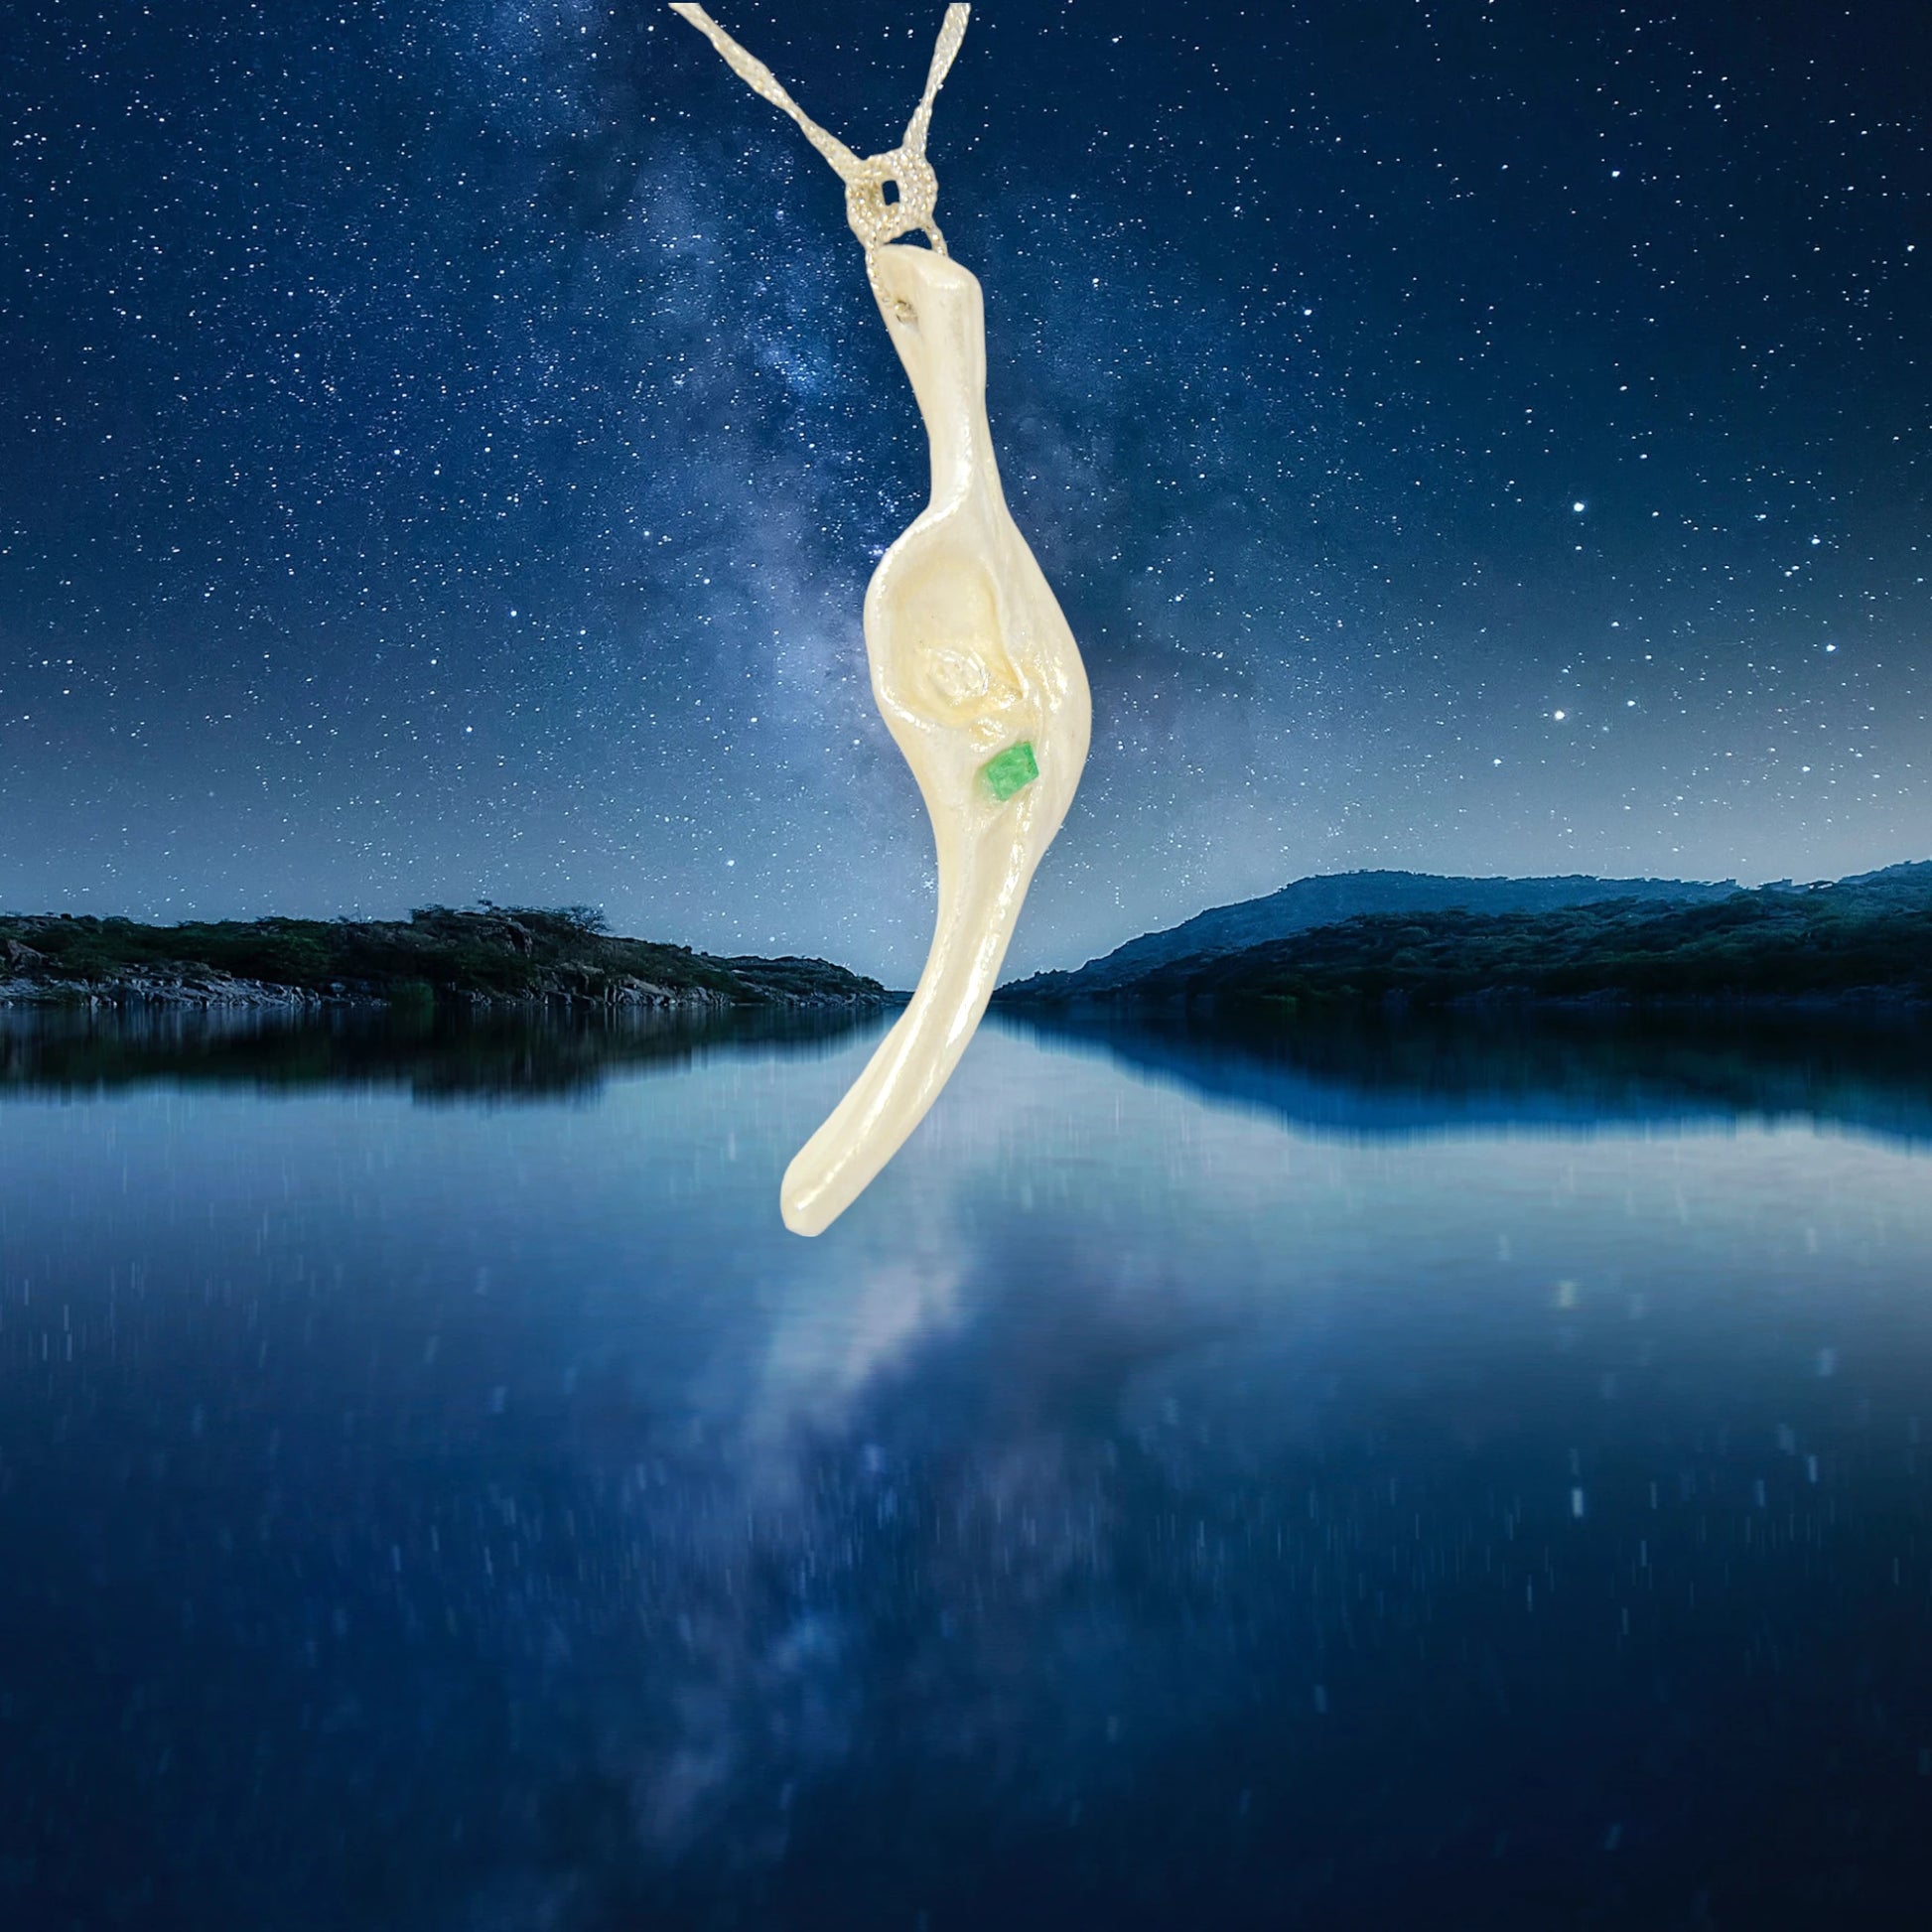 Empress natural seashell pendant with a Herkimer Diamond and Emerald. The pendant is hanging from a chain with a night landscape of water, mountains and starry sky.